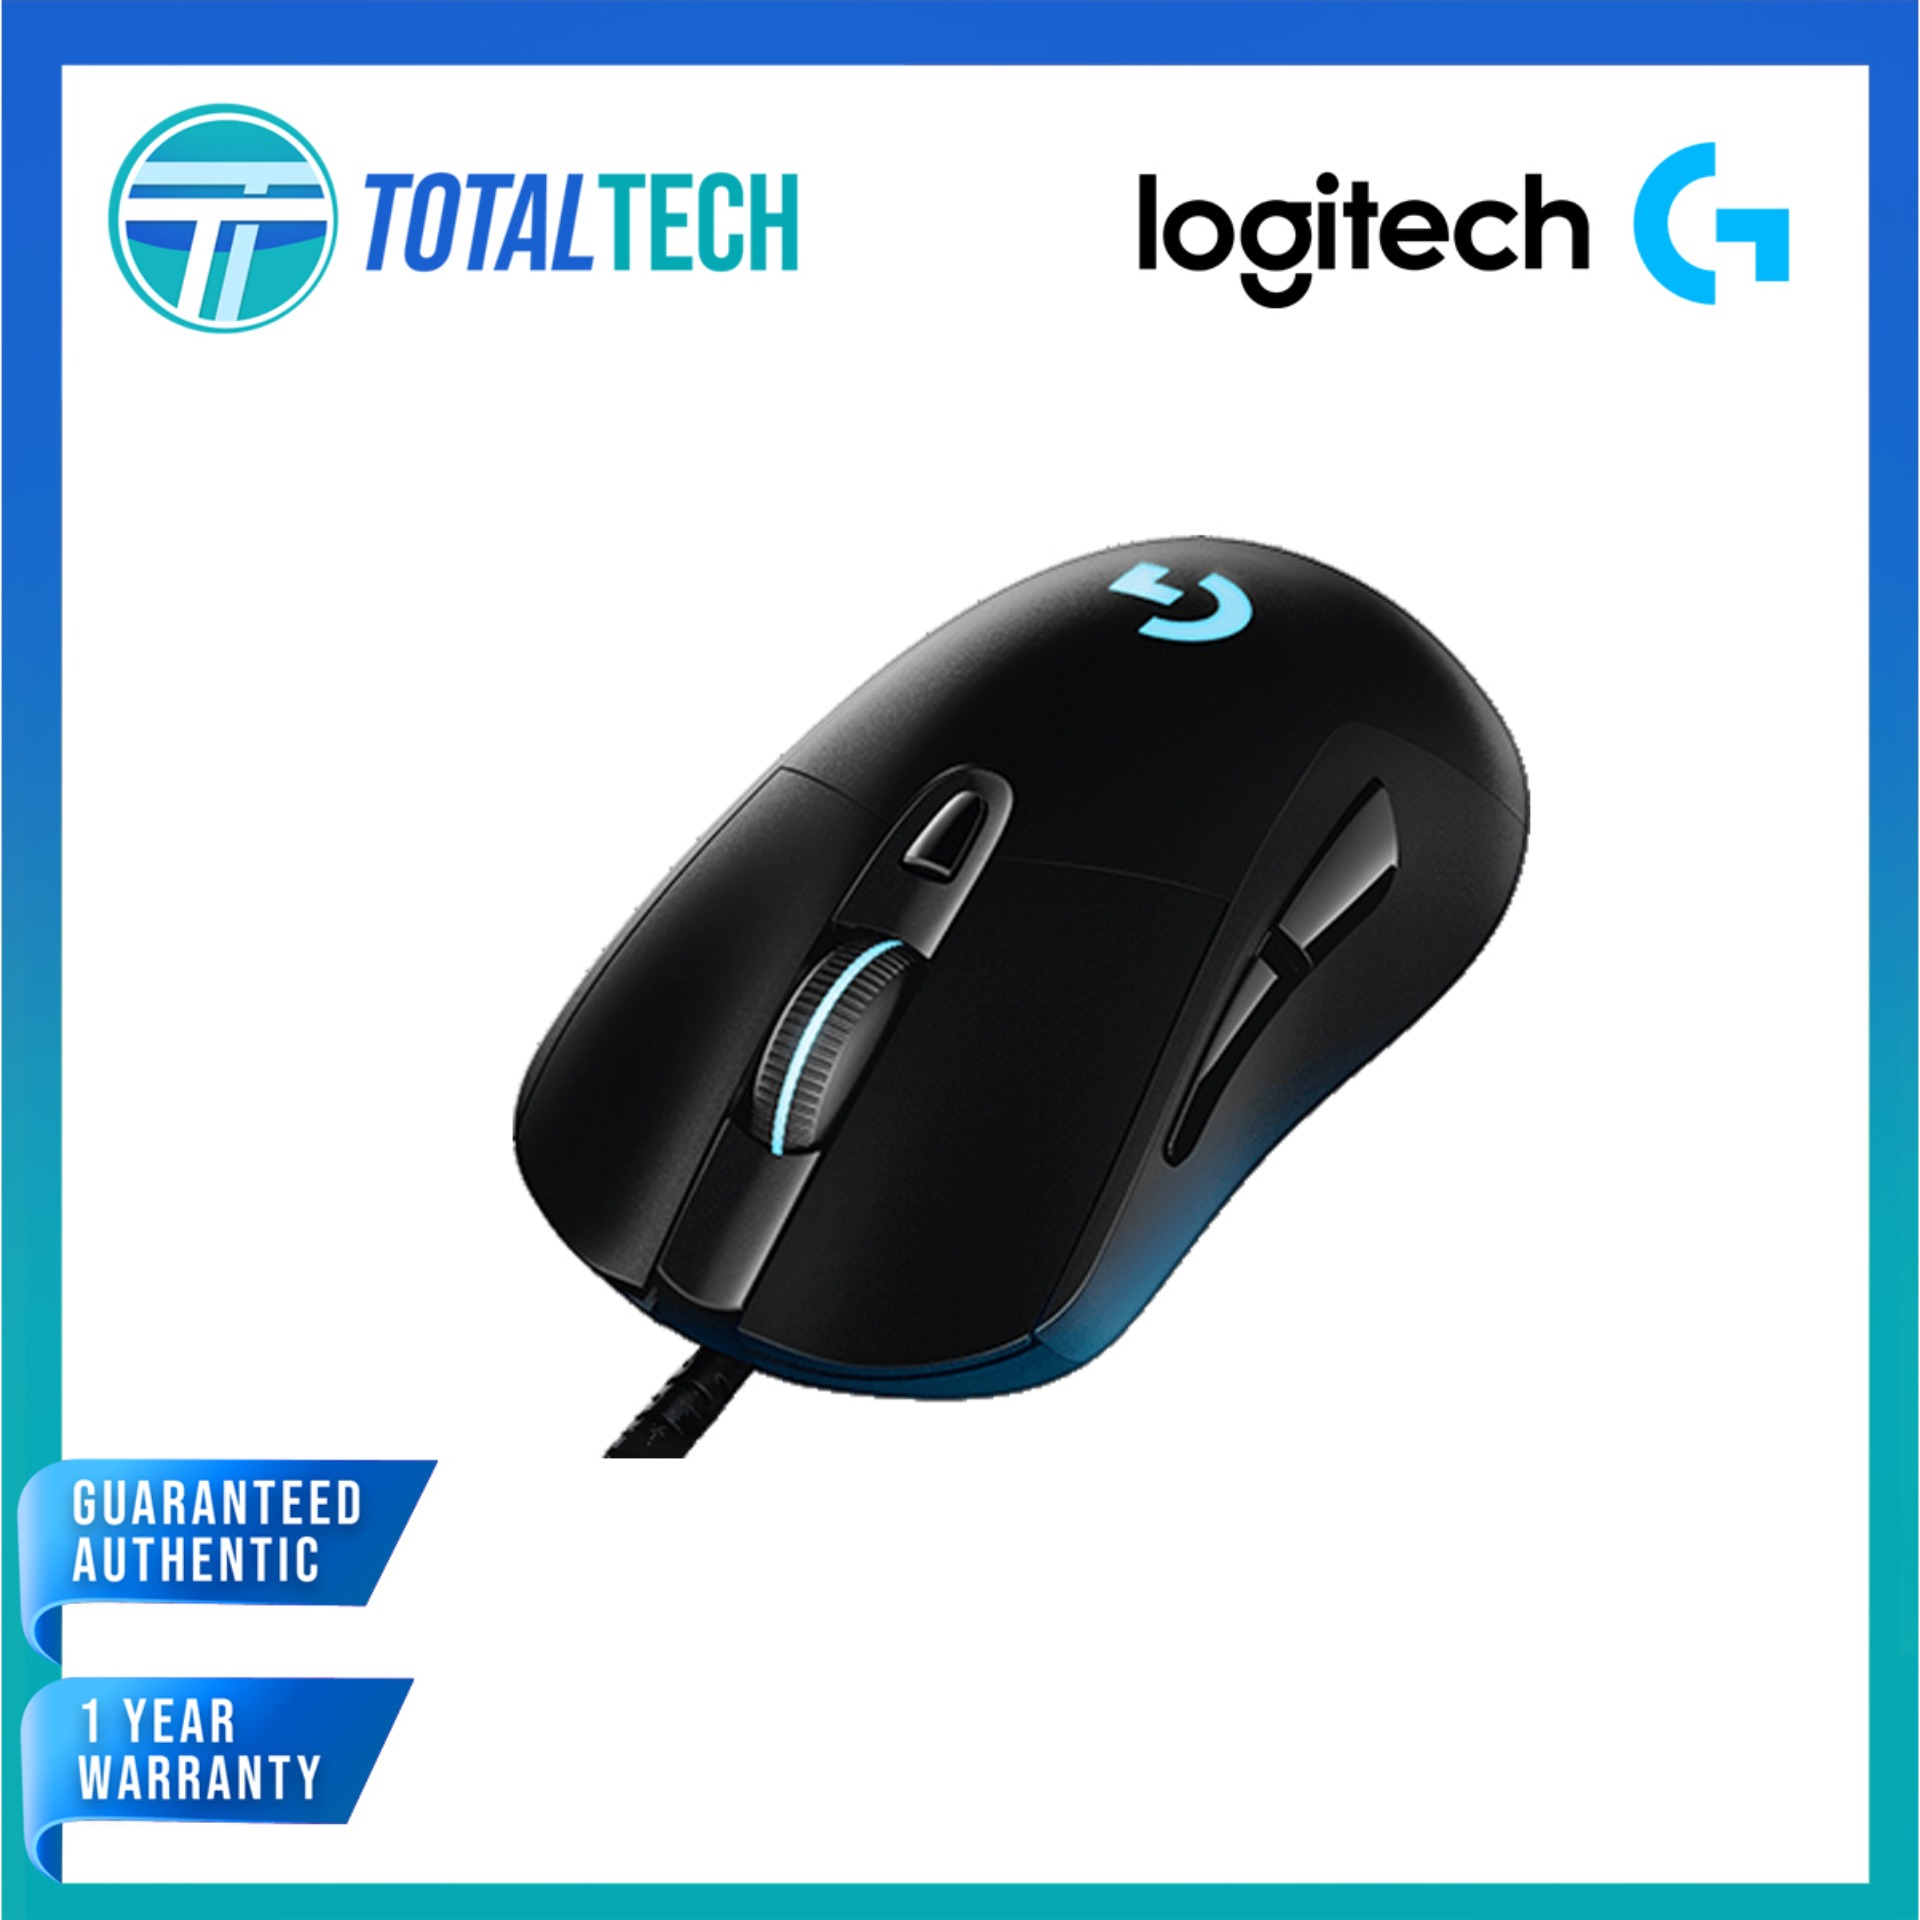 16 8 Million Color Backlighting Up To 12 000 Dpi 6 Programmable Buttons Onboard Memory Logitech G403 Prodigy Rgb Gaming Mouse Gaming Mice